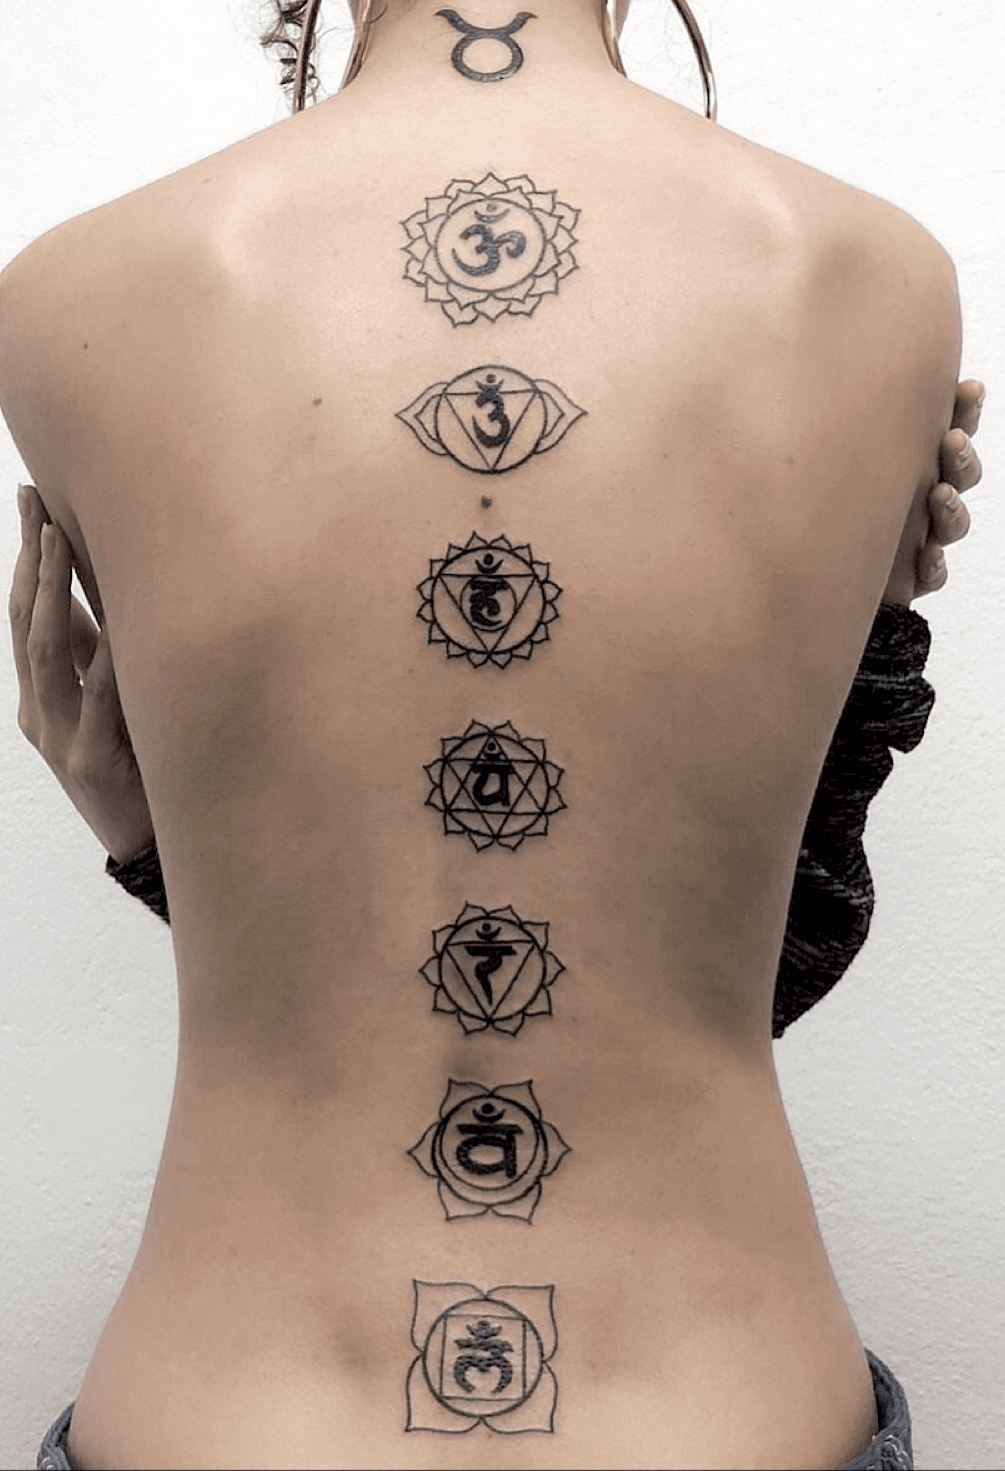 55 Energizing Chakra Tattoo Designs  Focus Your Energy Centers